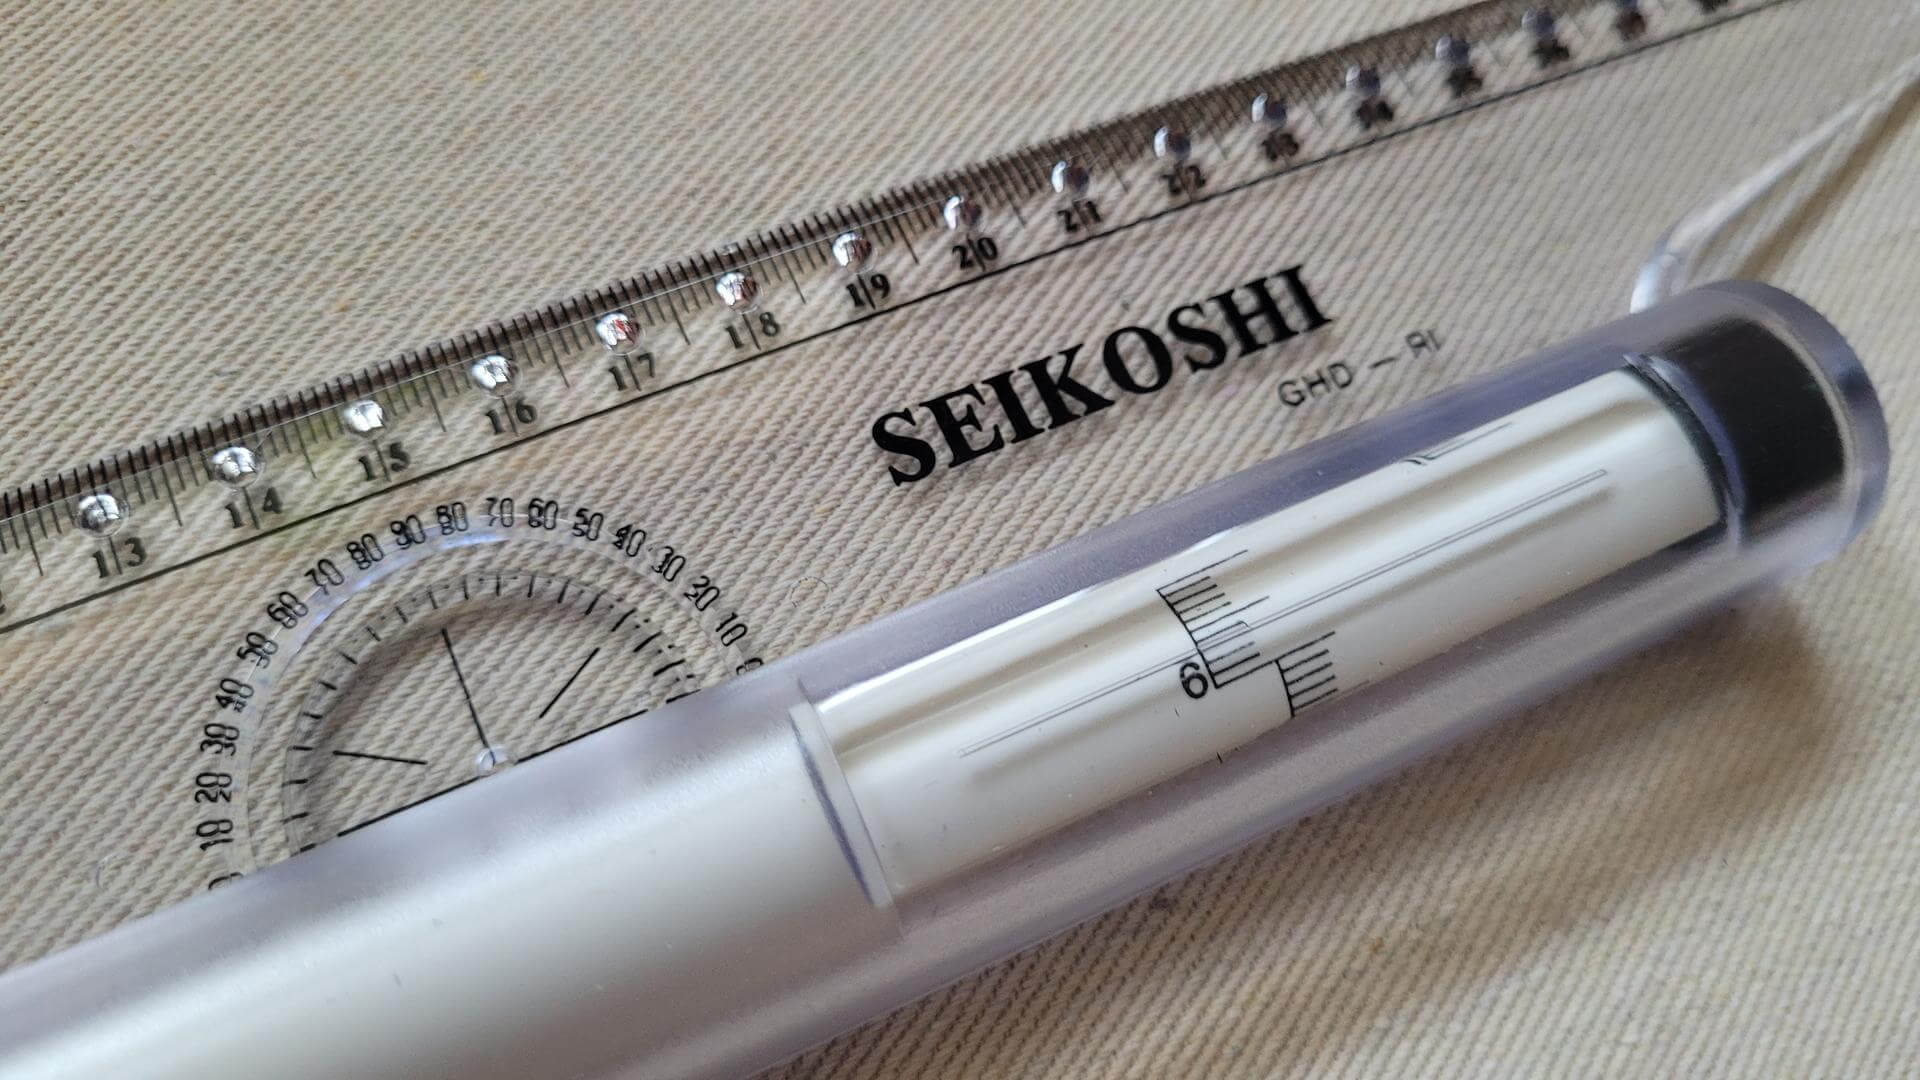 Vintage Sekoshi parallel rolling ruler with metric balancing scale 30 cm long. Made in Japan art, architectural, drawing, and lettering collectible tool used for drawing vertical and parallel lines, charts and graphs, 3D drawings, angles, horizontal lines, circles, musical notes and more.